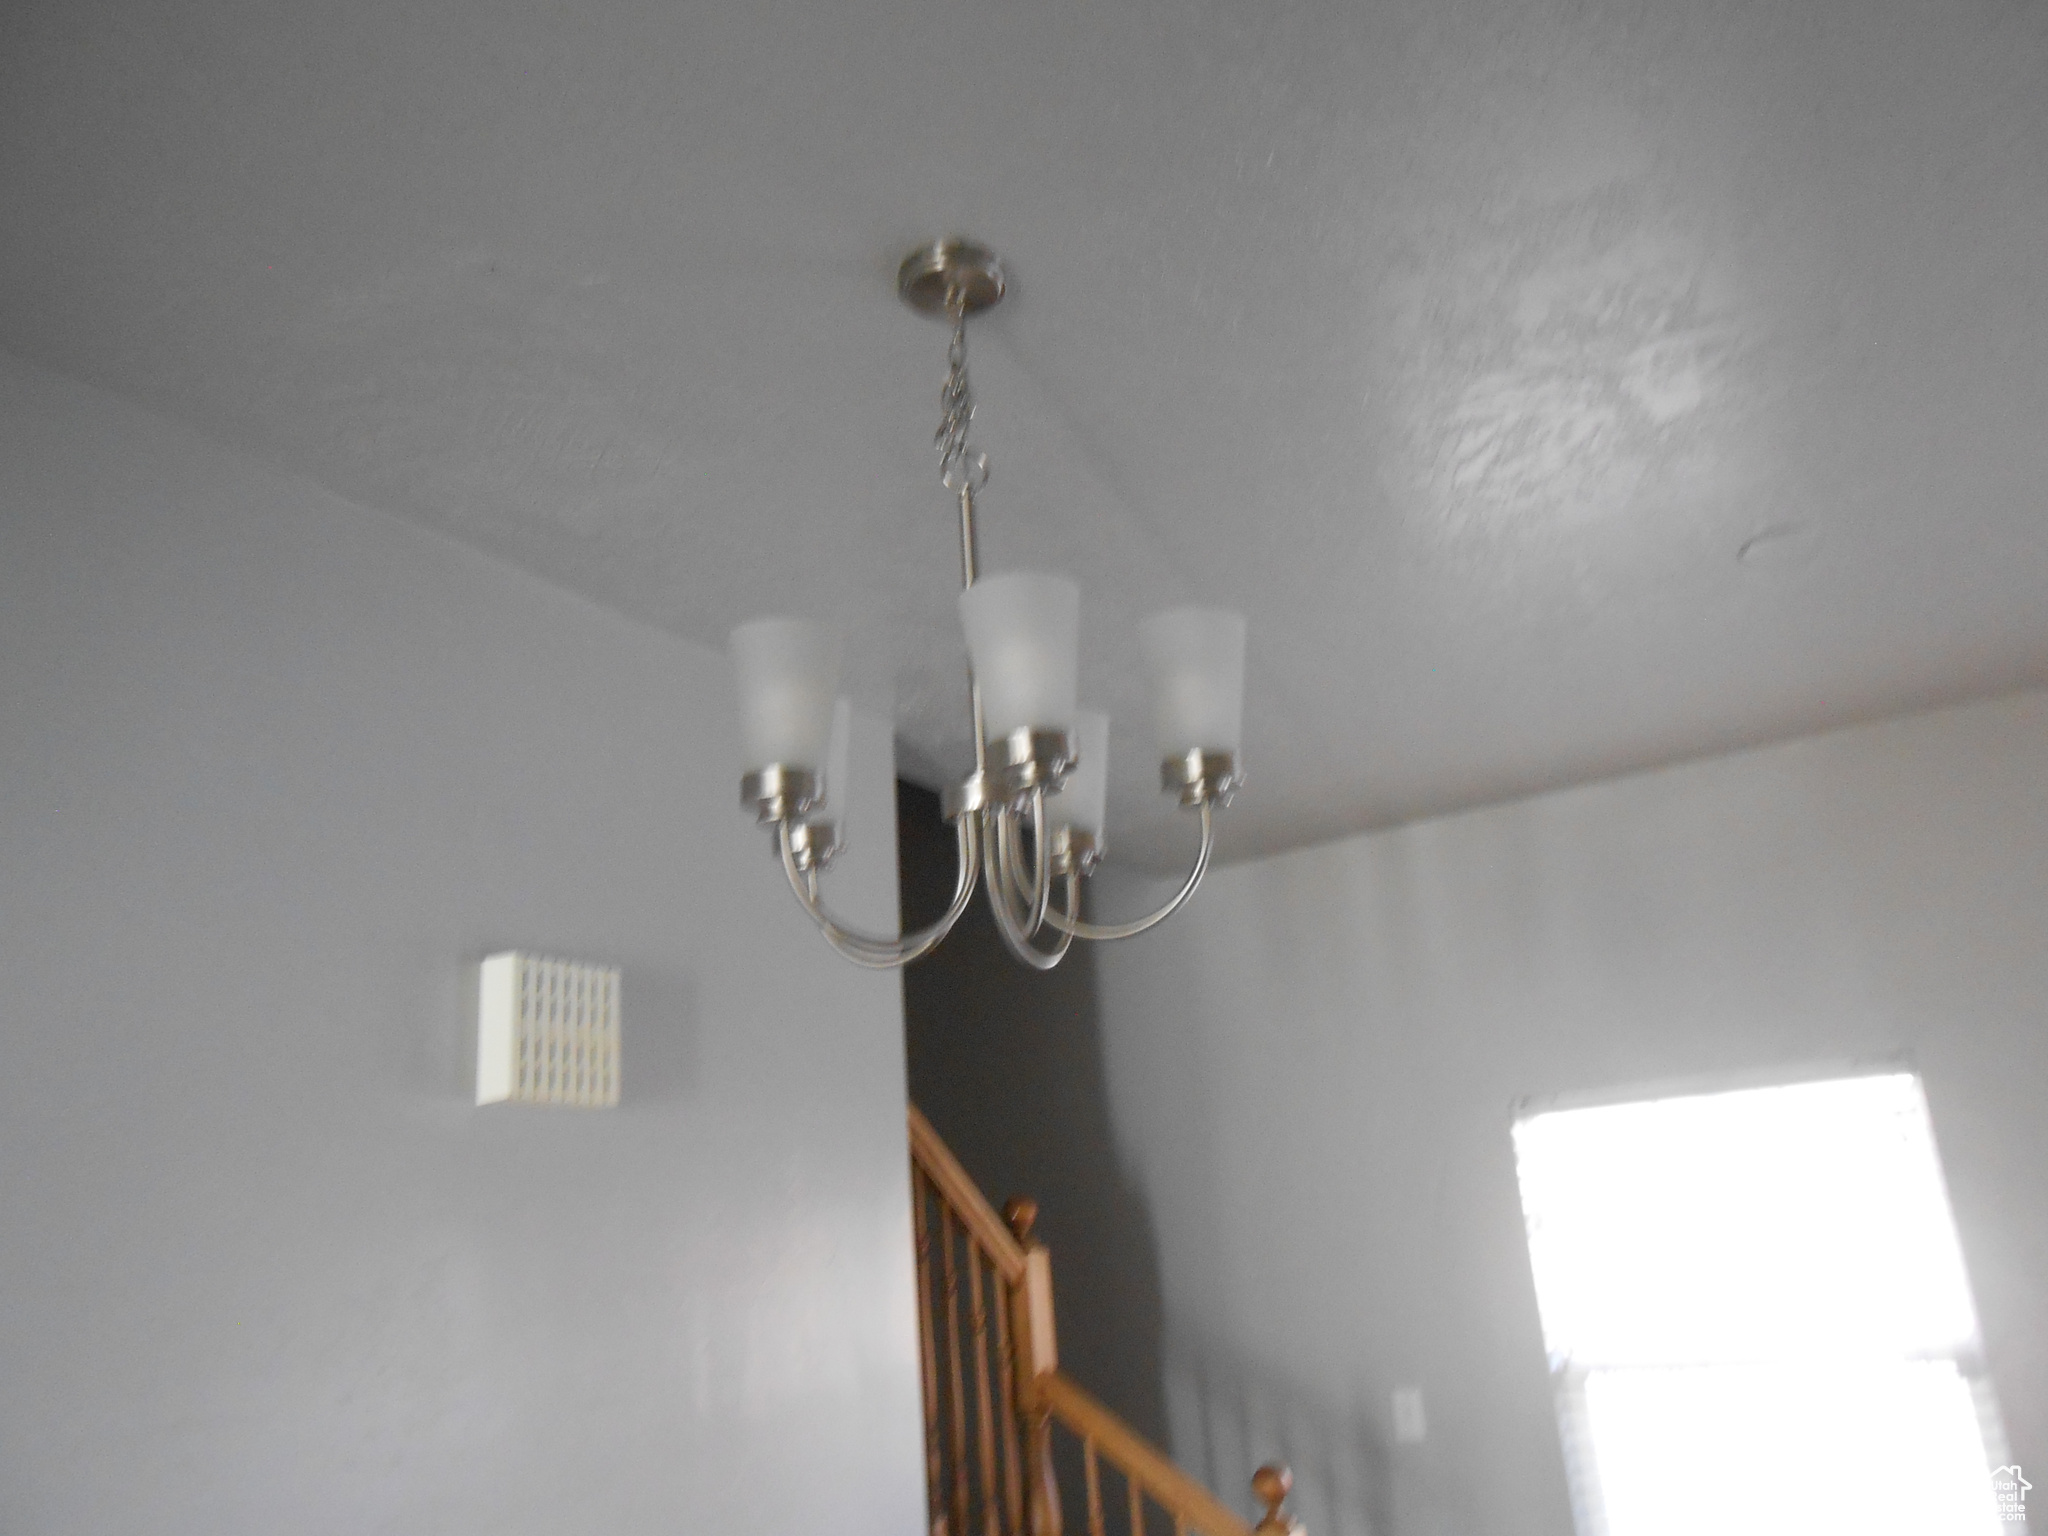 Interior details with a notable chandelier